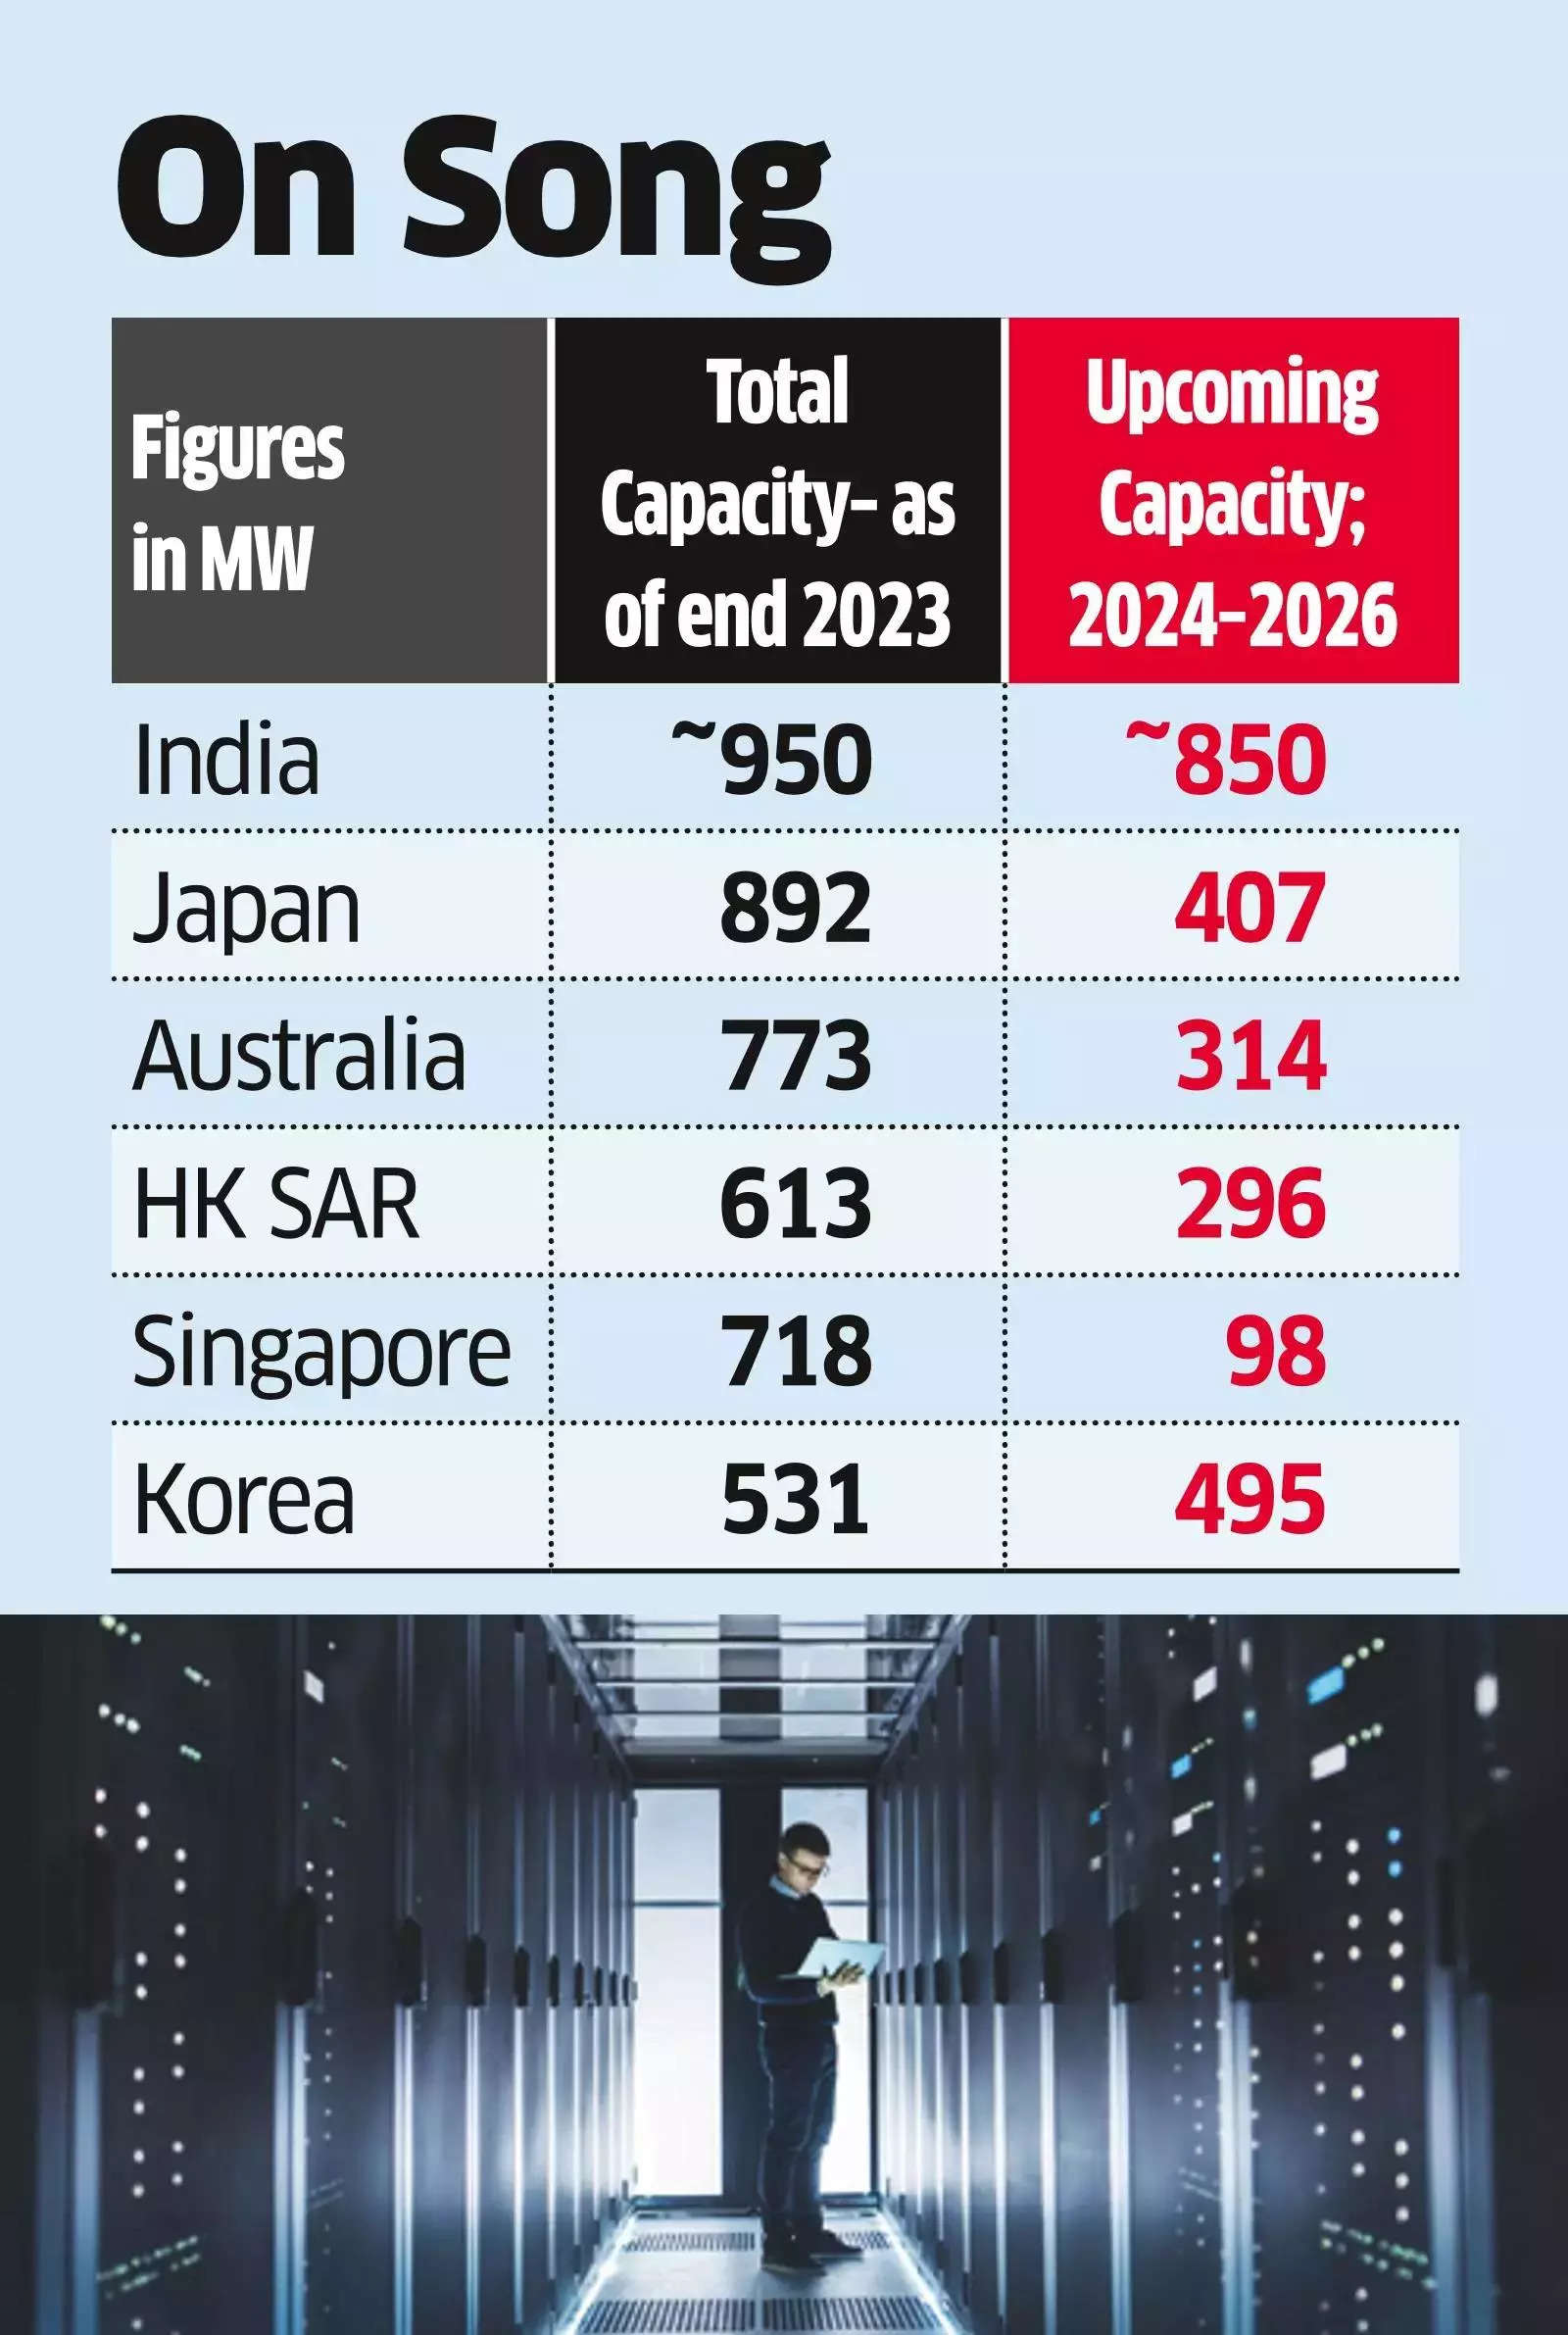 India at the Centre of Data Biz in Apac